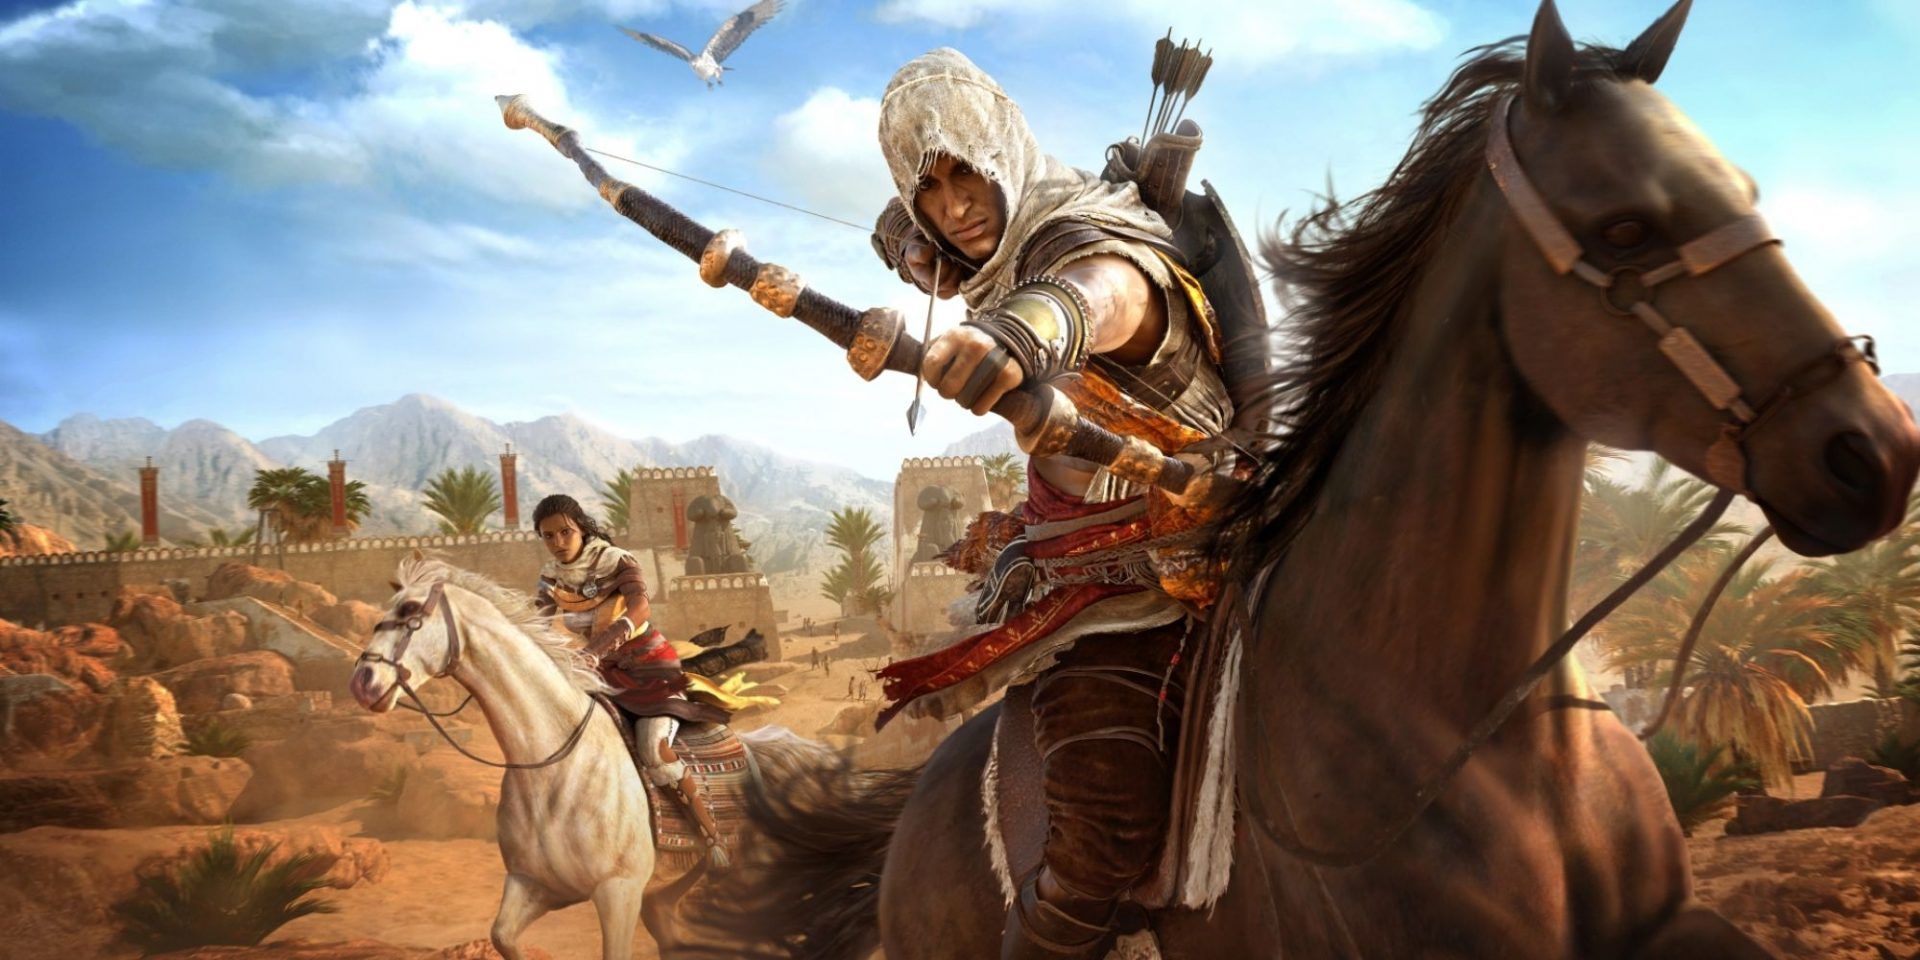 Rumour: The Next Assassin's Creed Game, Rift, Will Be Set in Baghdad